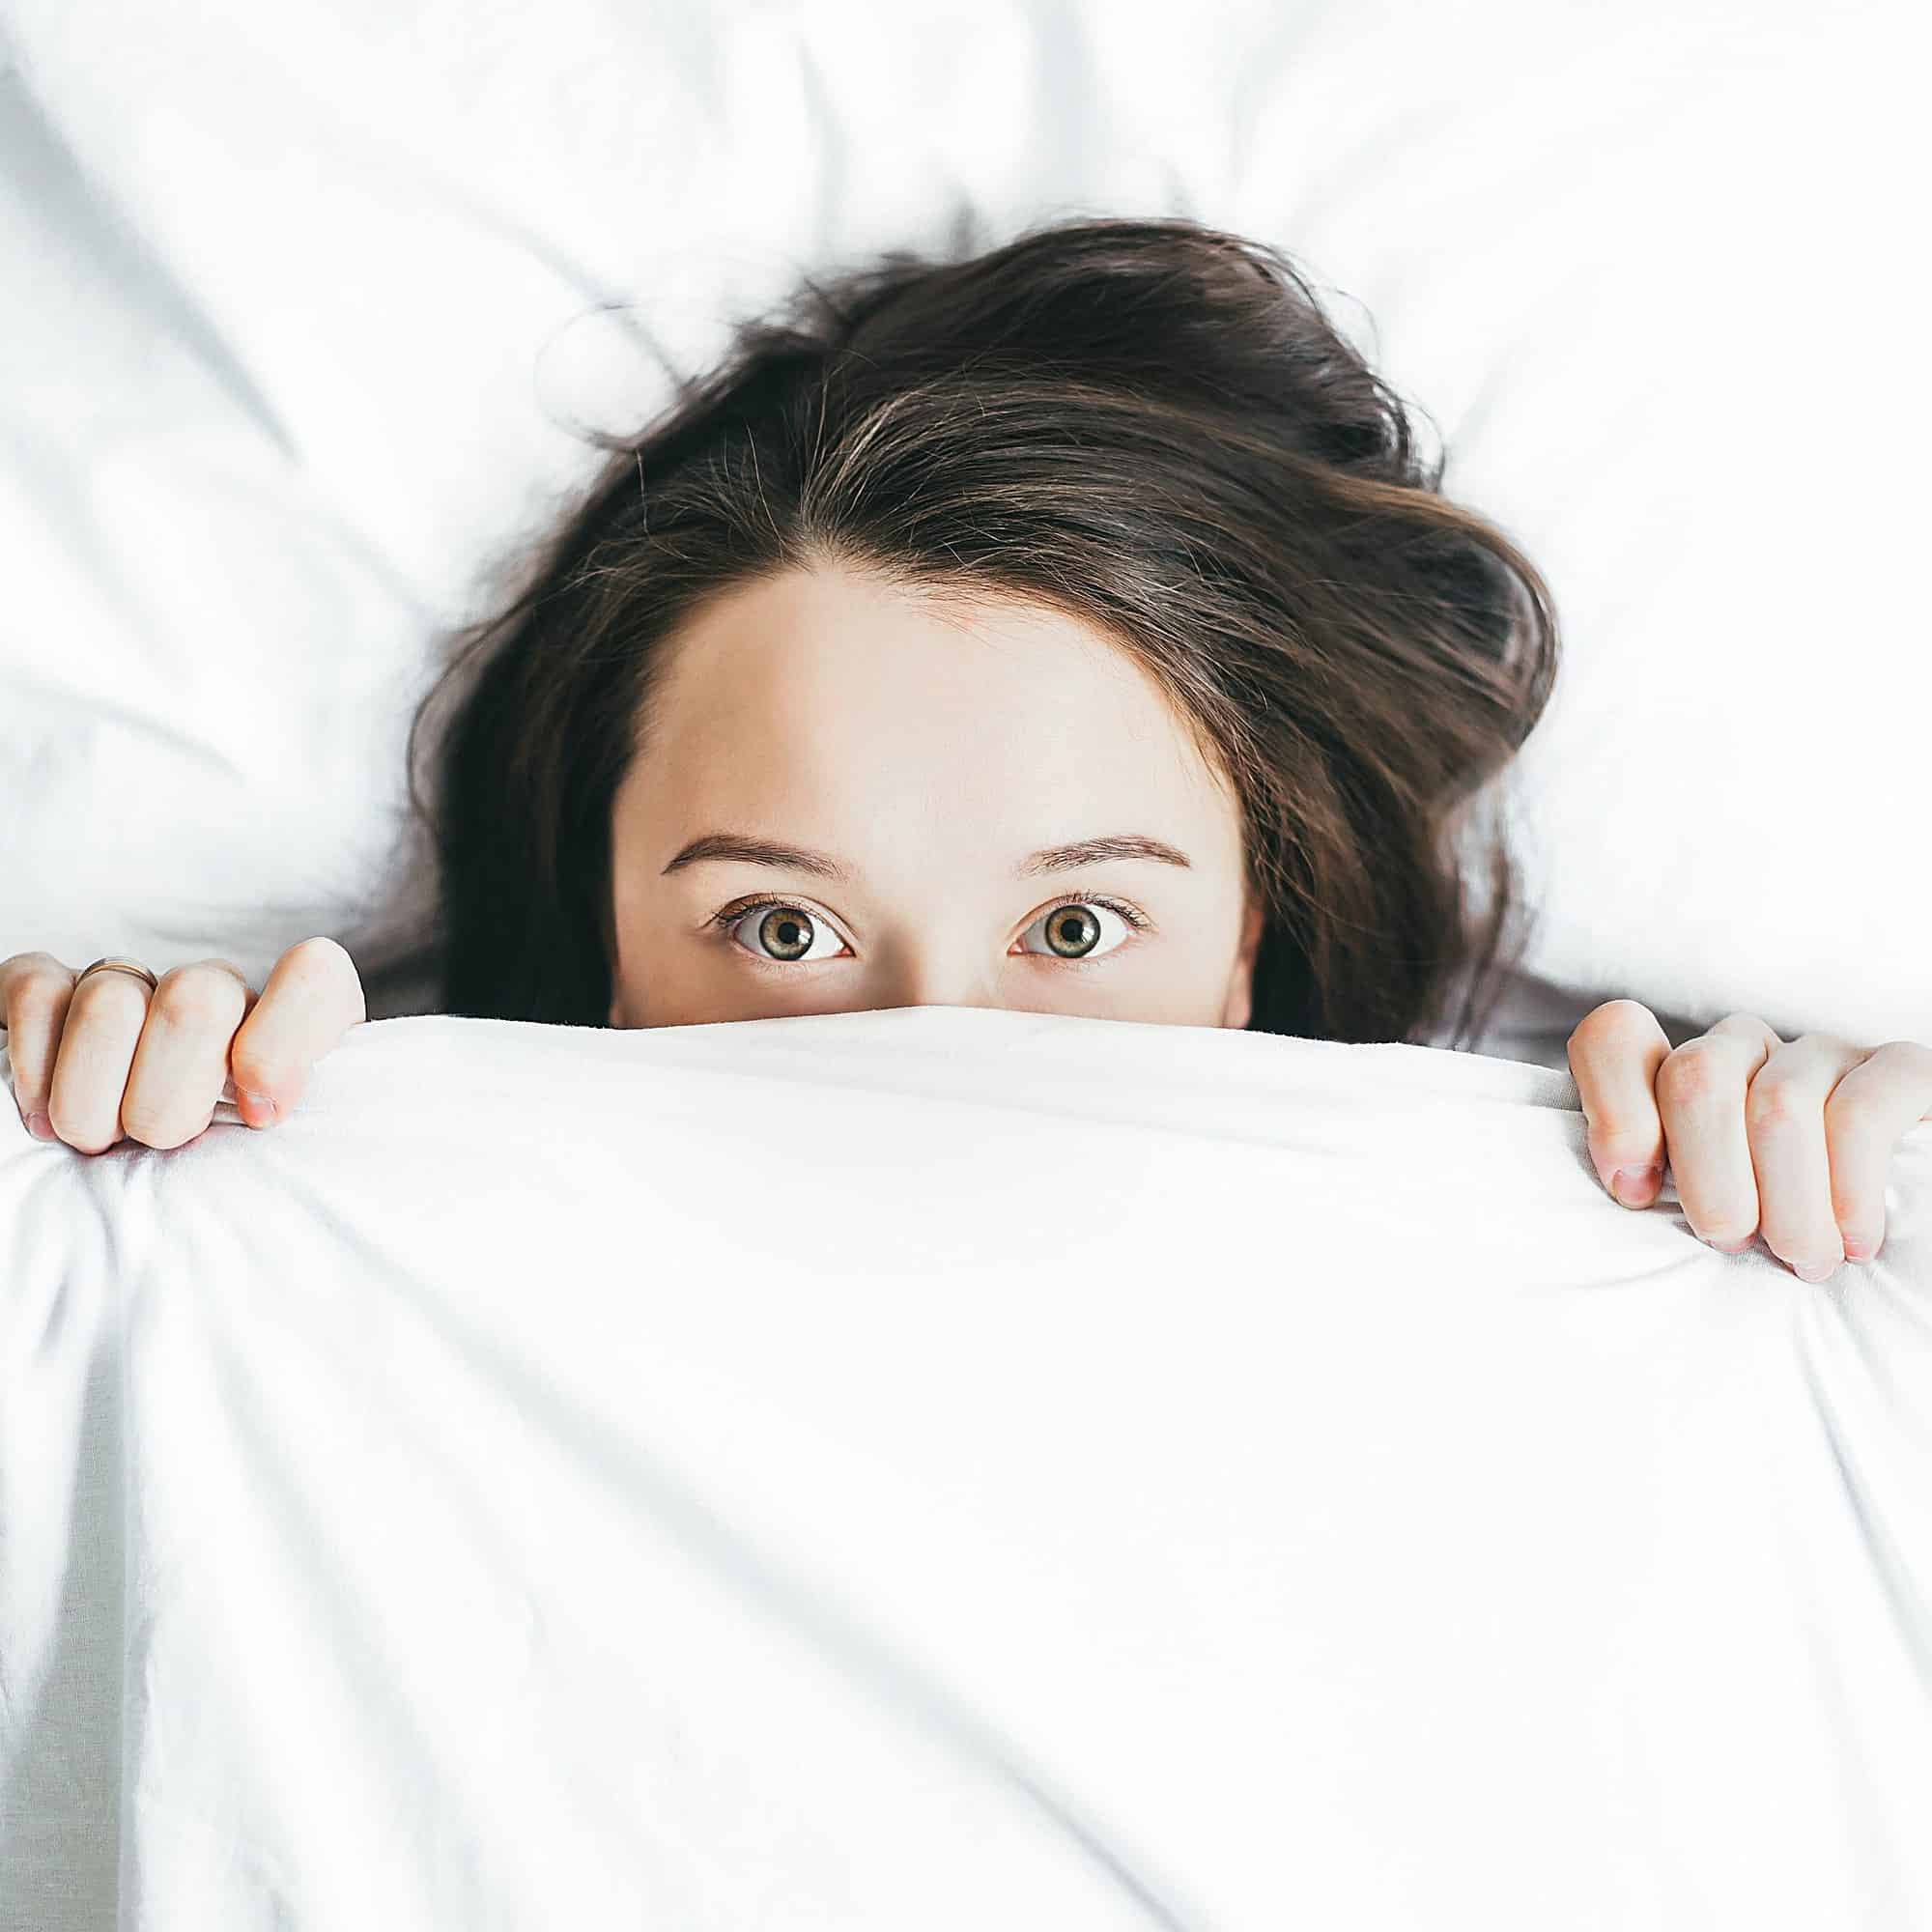 Woman hiding under a blanket with fear in her eyes